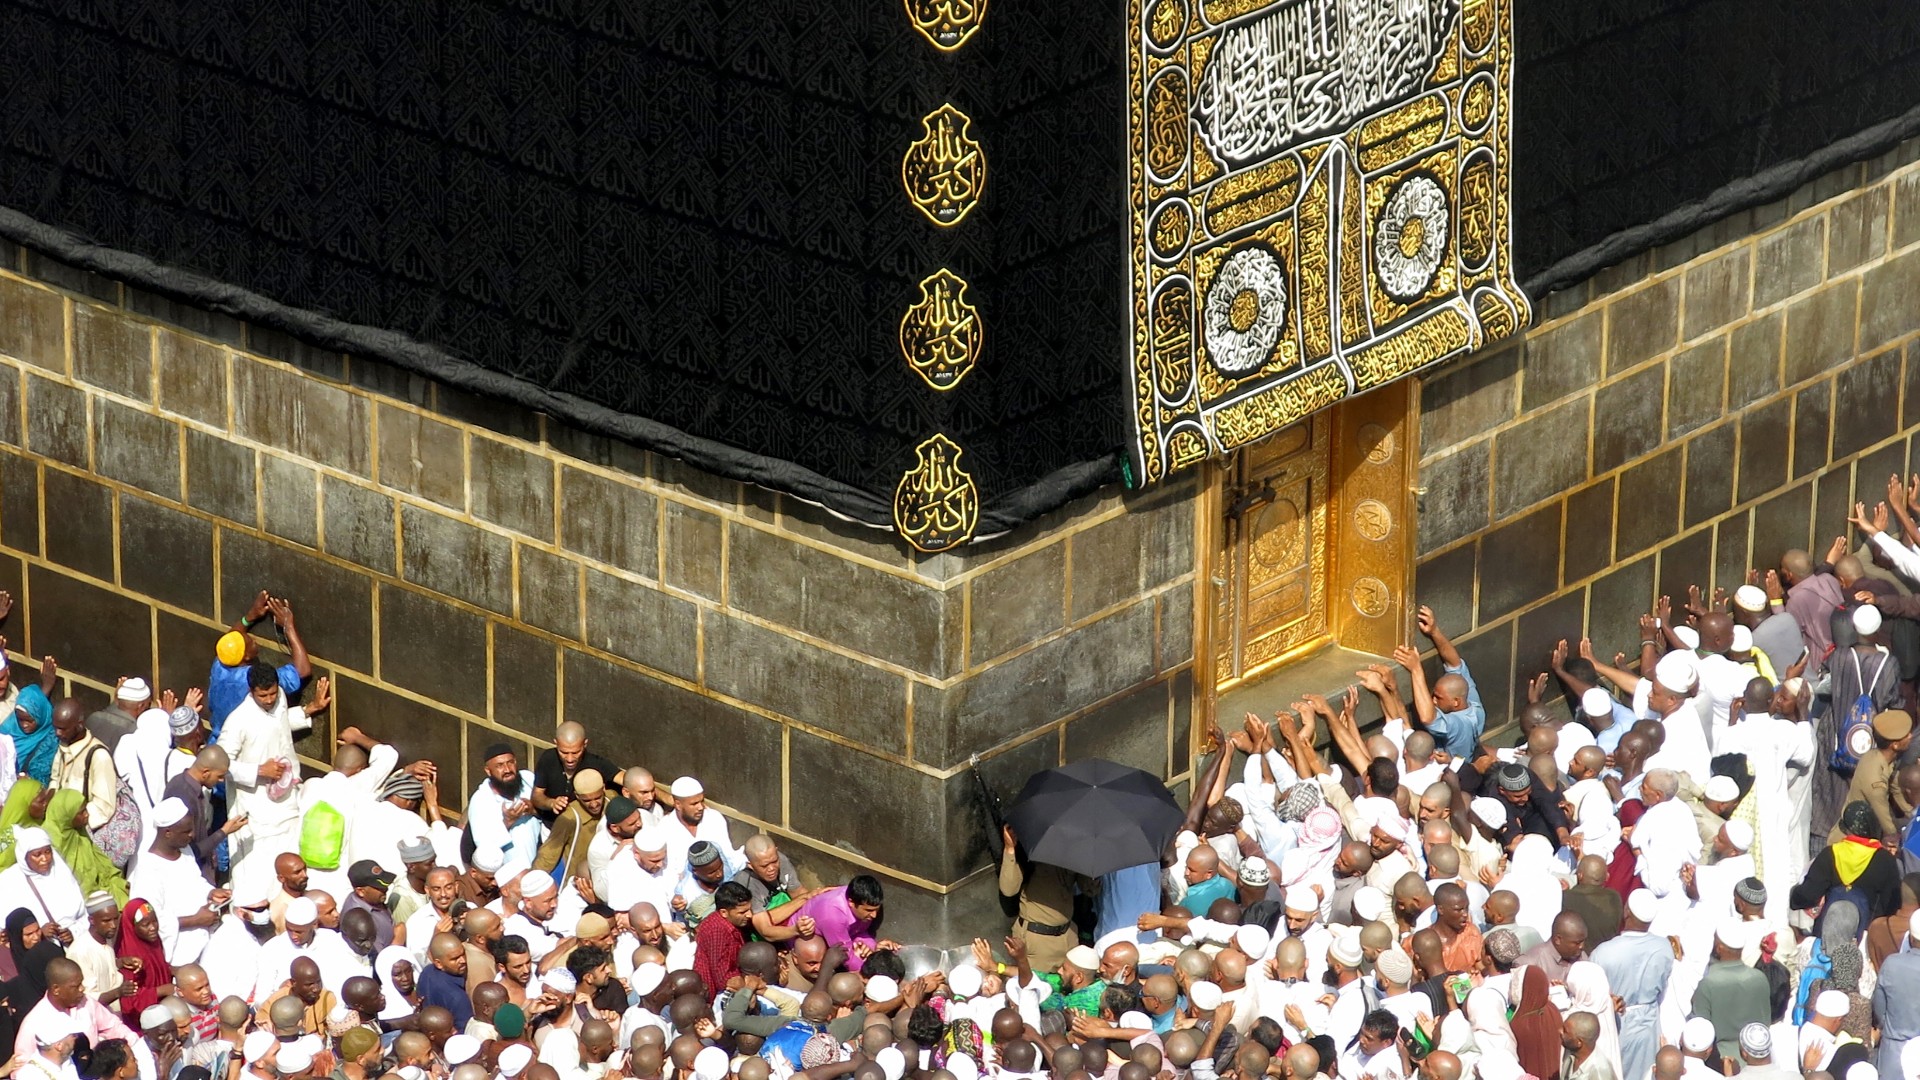 Muslim pilgrims from around the world circle around the Kaaba at the Grand Mosque, in the Saudi city of Mecca (AFP)